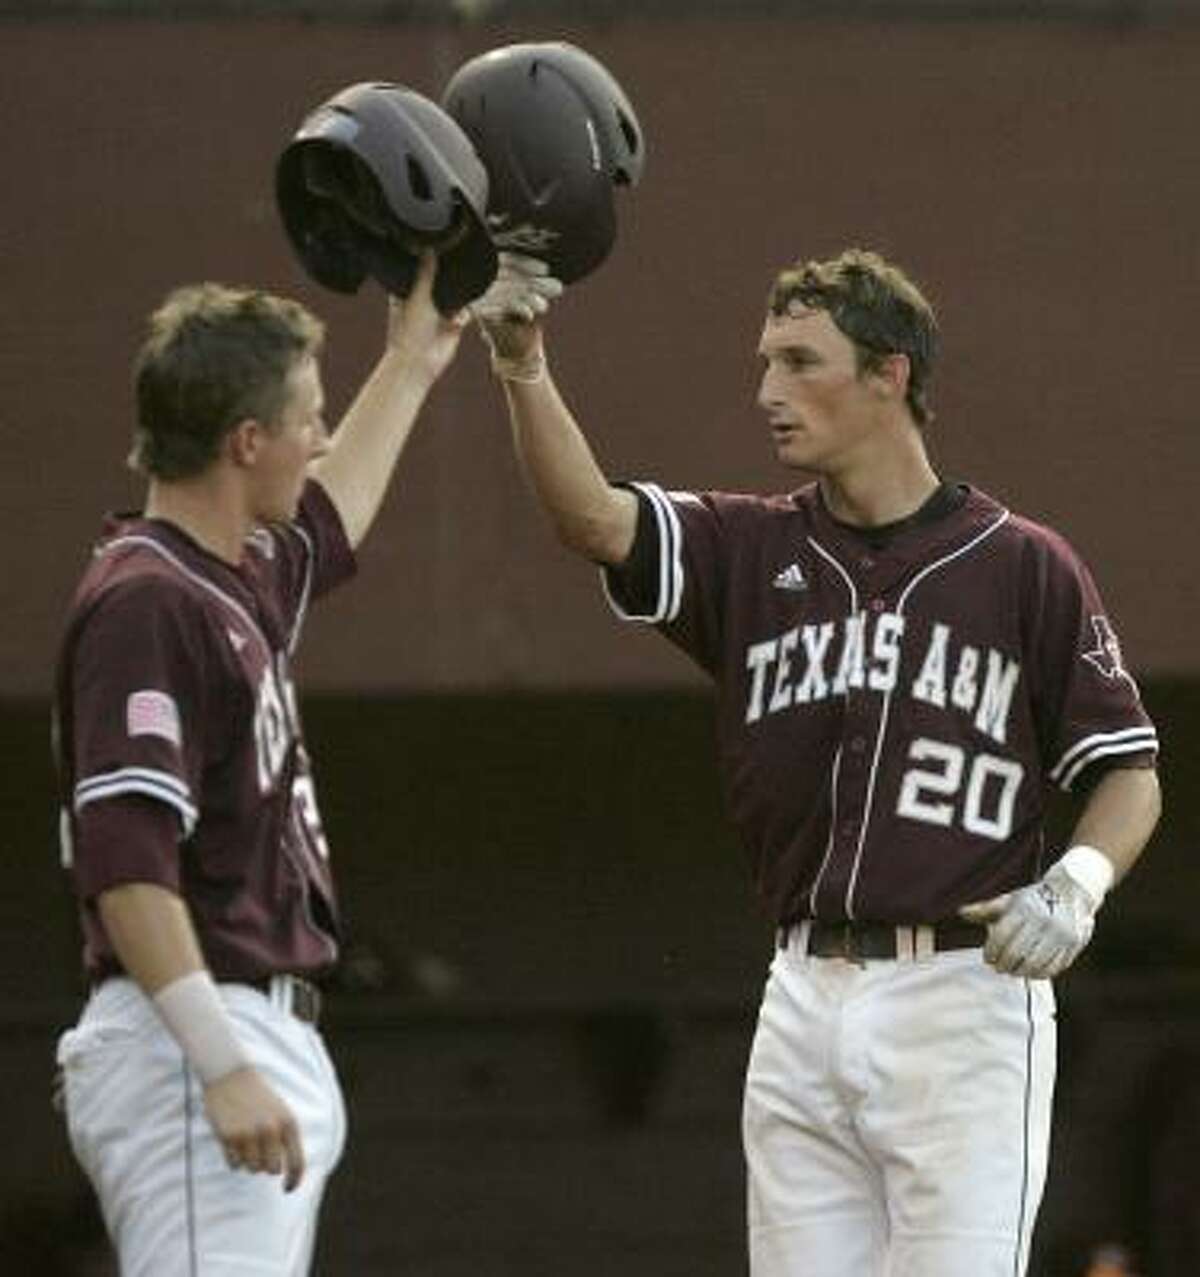 A&M's Adam Smith celebrates with Jacob House, left, after hitting a home run in the second inning on Monday night.